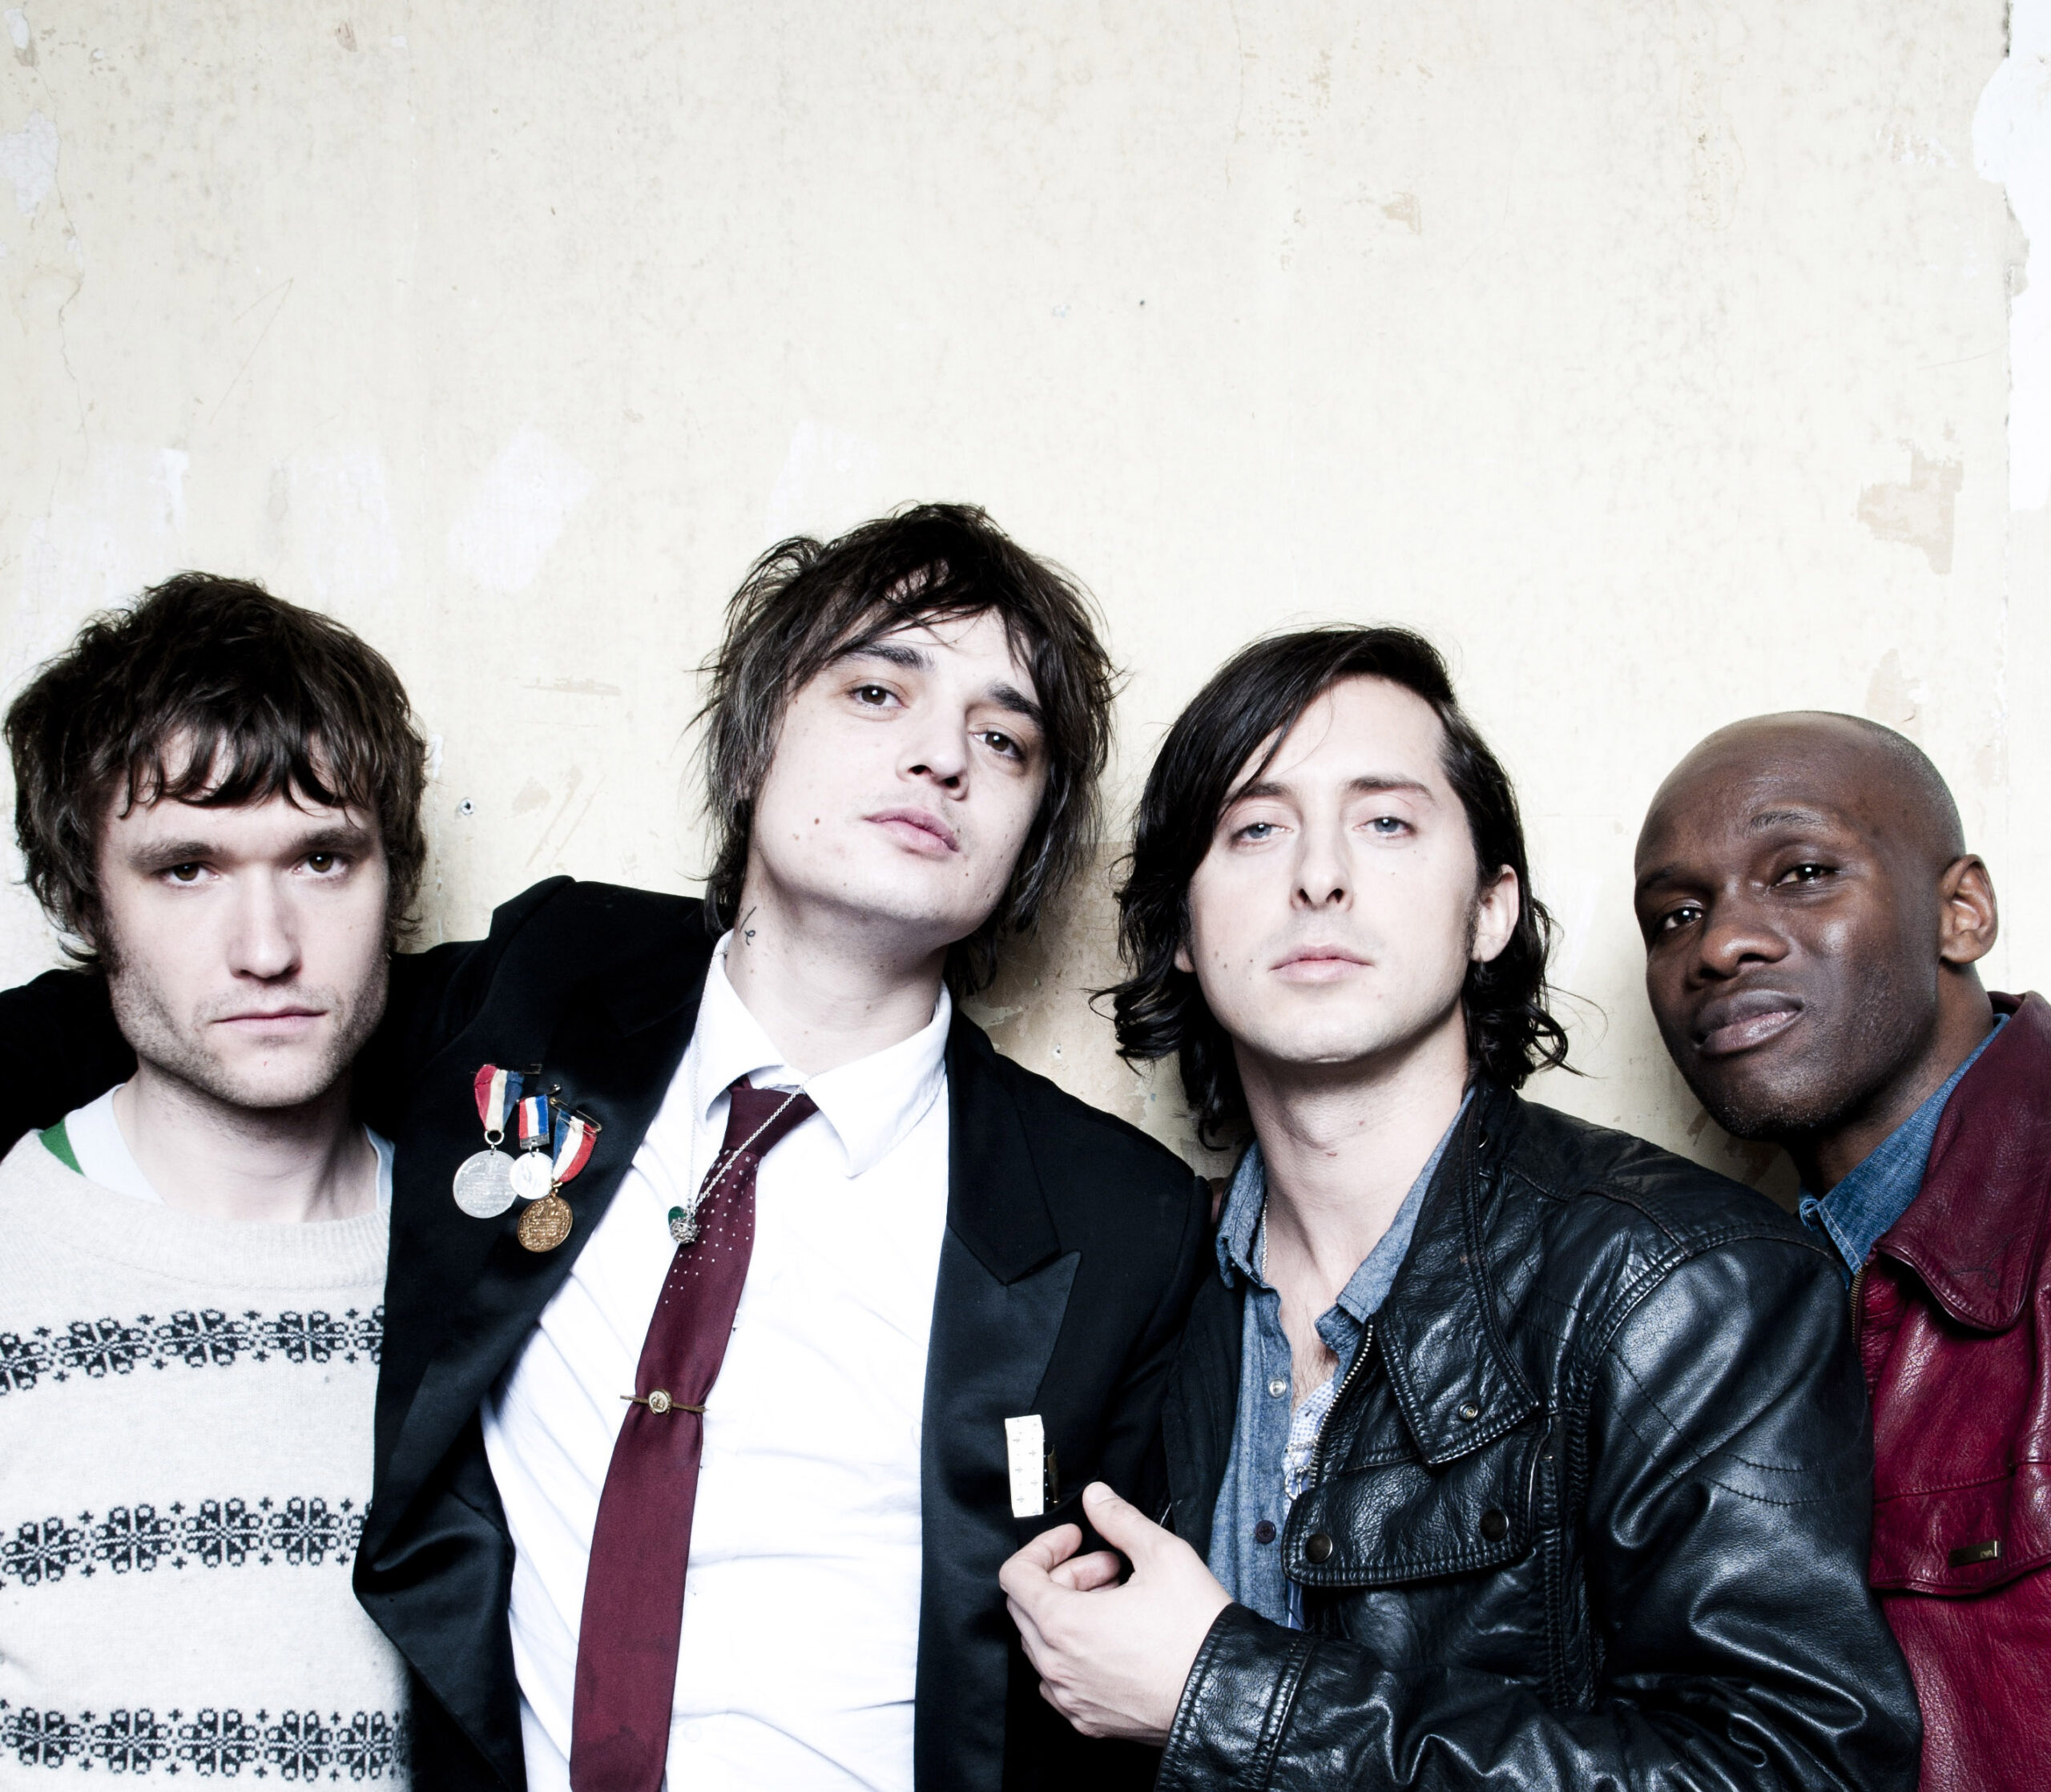 Snap Galleries collaborate with “the UK's most important music photographer” Roger Sargent for new Libertines exhibition 3